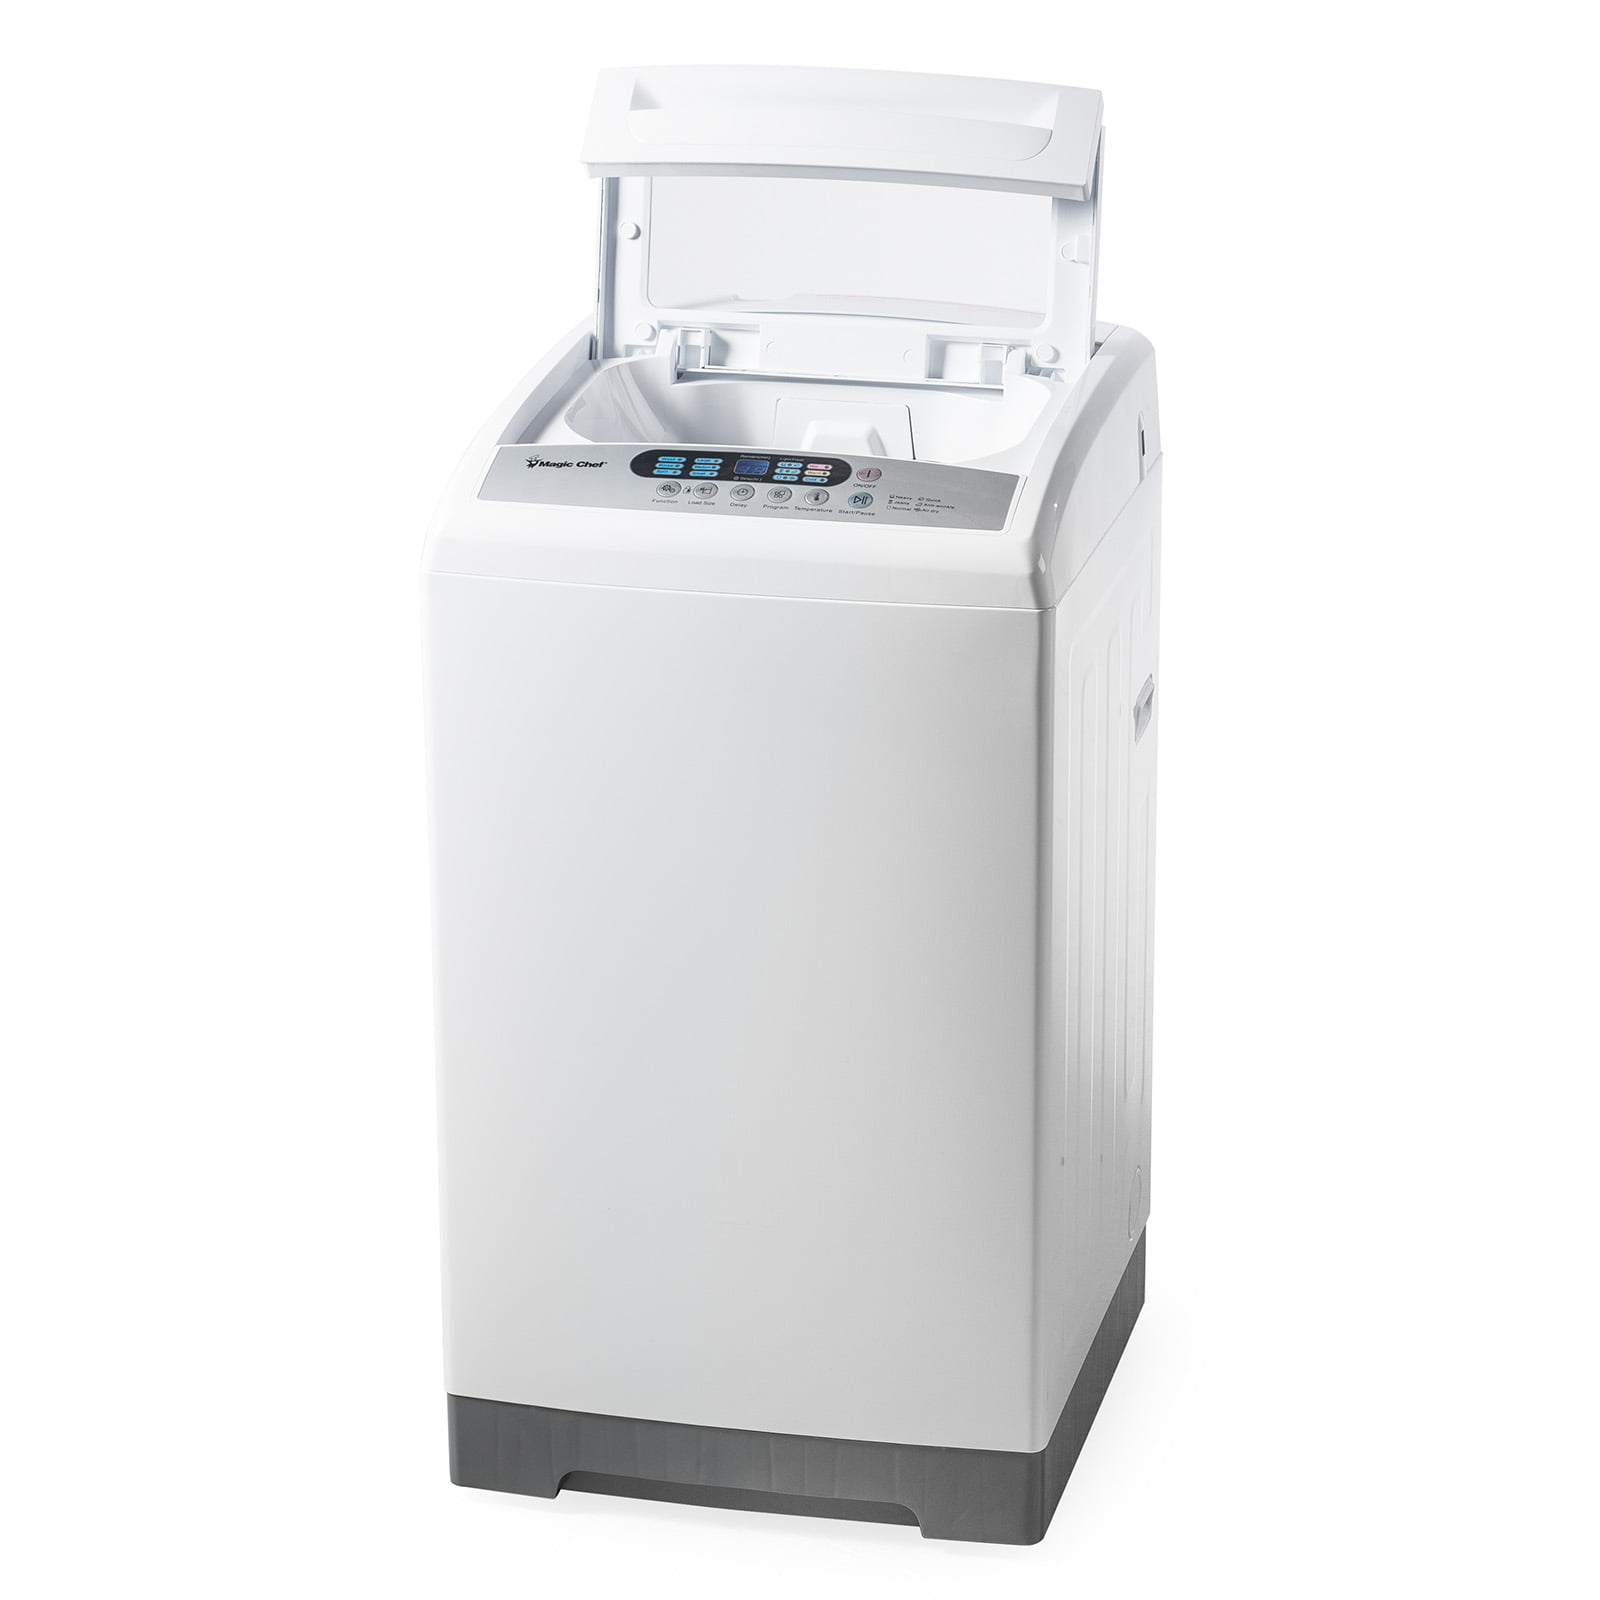 Ft MCSTCW16W4 Stainless Steel 1.6 Cu White Compact Top-Load Washer Magic Chef 